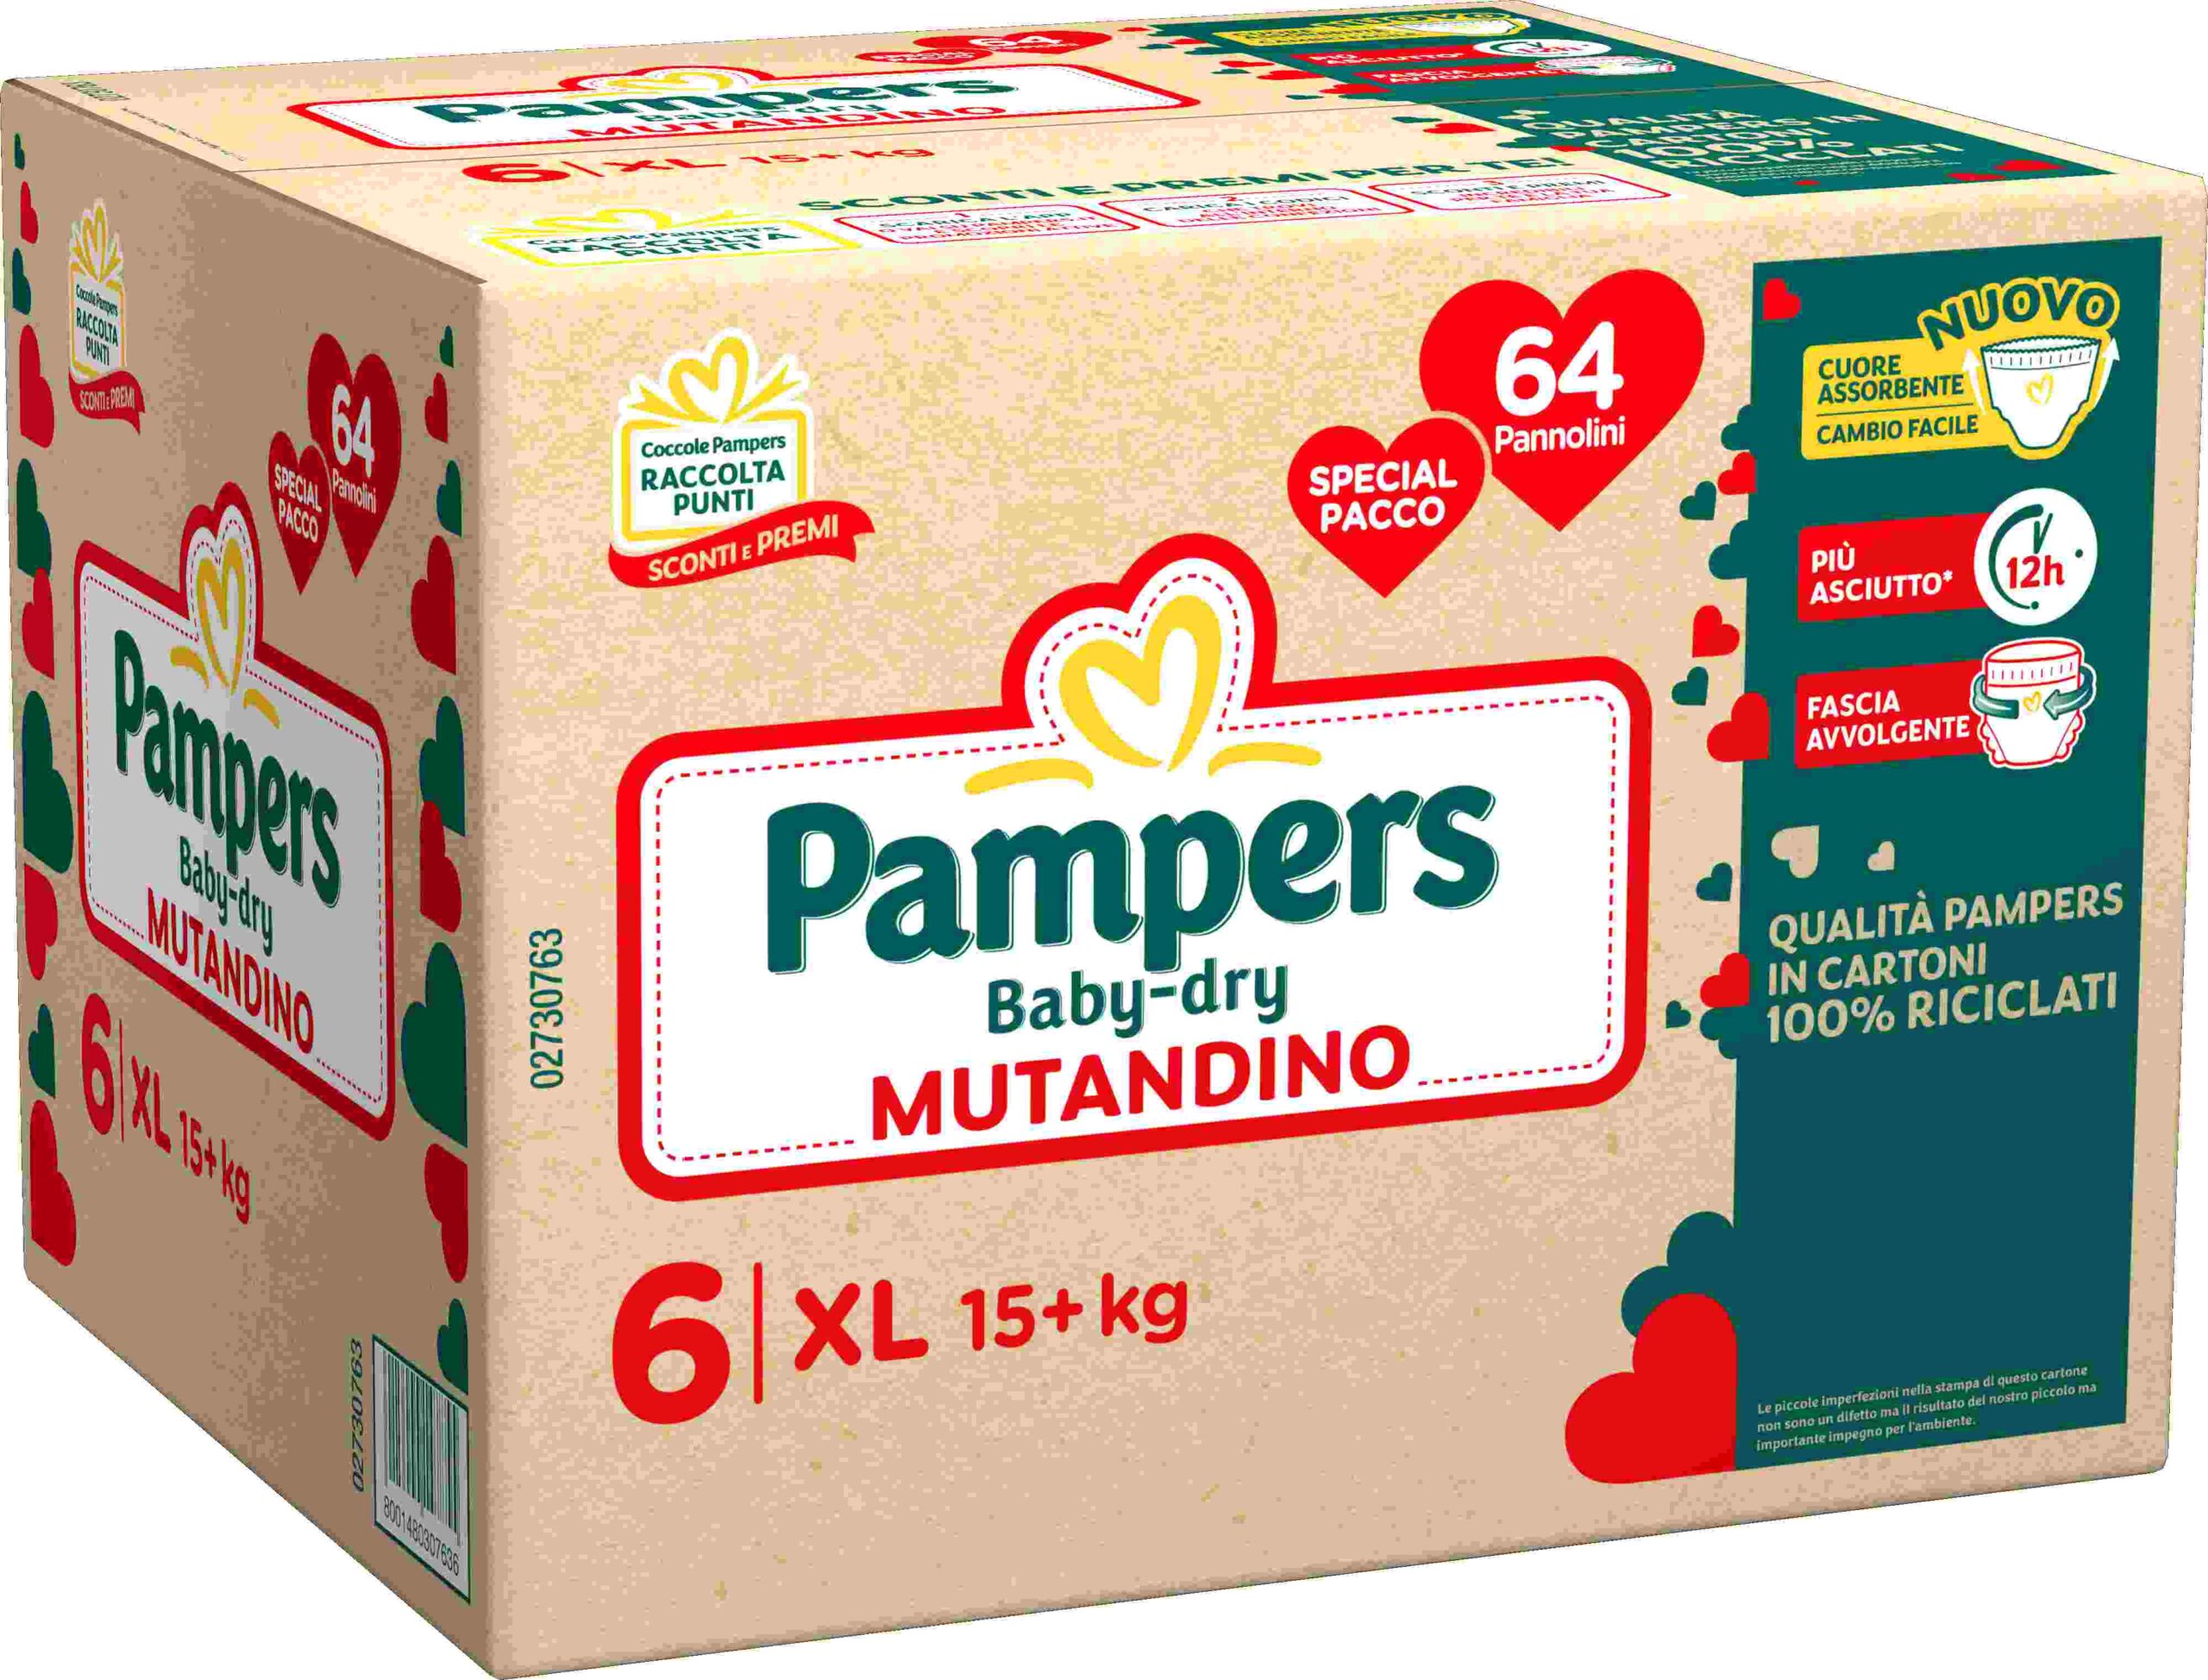 Pampers baby dry mutandino special xl 64 pz - Pampers